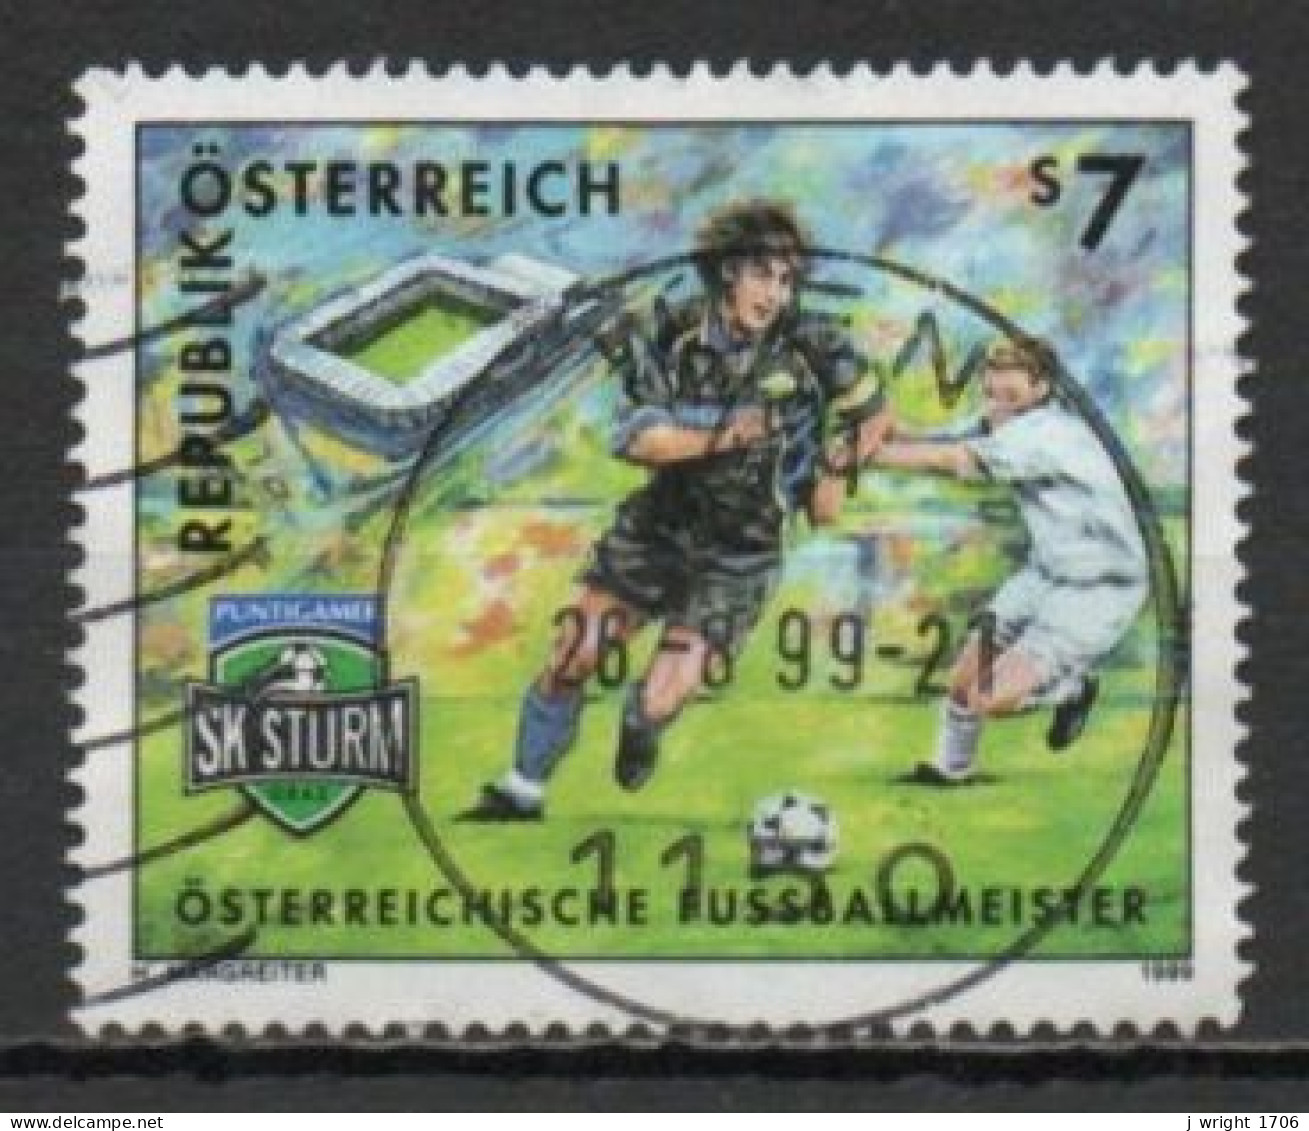 Austria, 1999, SK Puntigamer Sturm Graz Austrian Football Champions, 7s, USED - Used Stamps